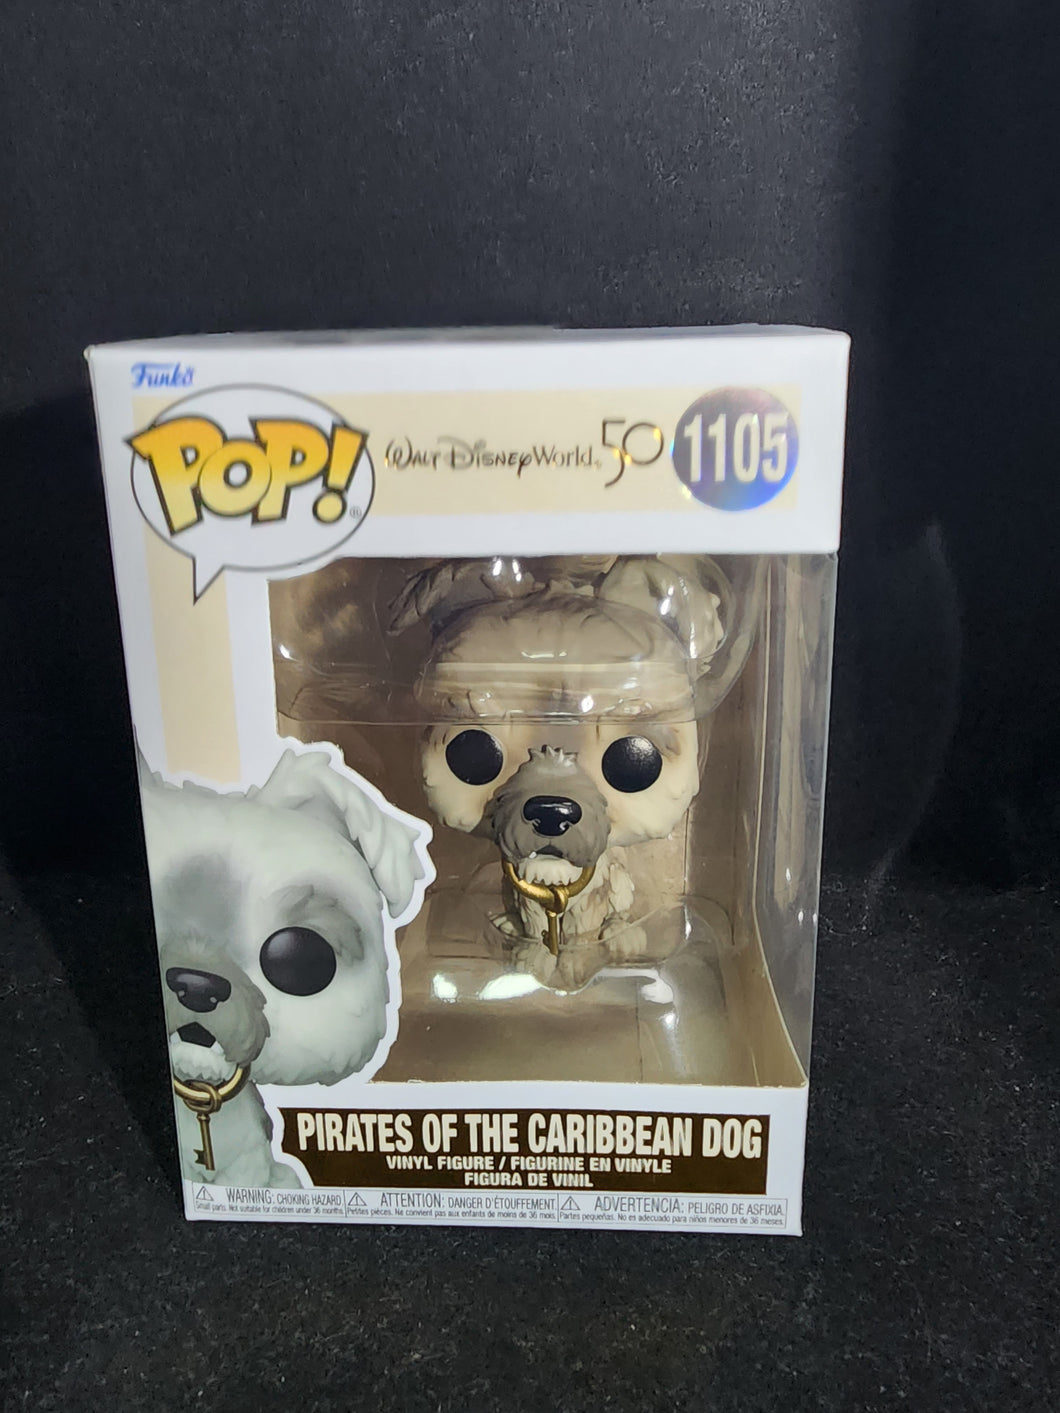 Pirates of the Caribbean Dog